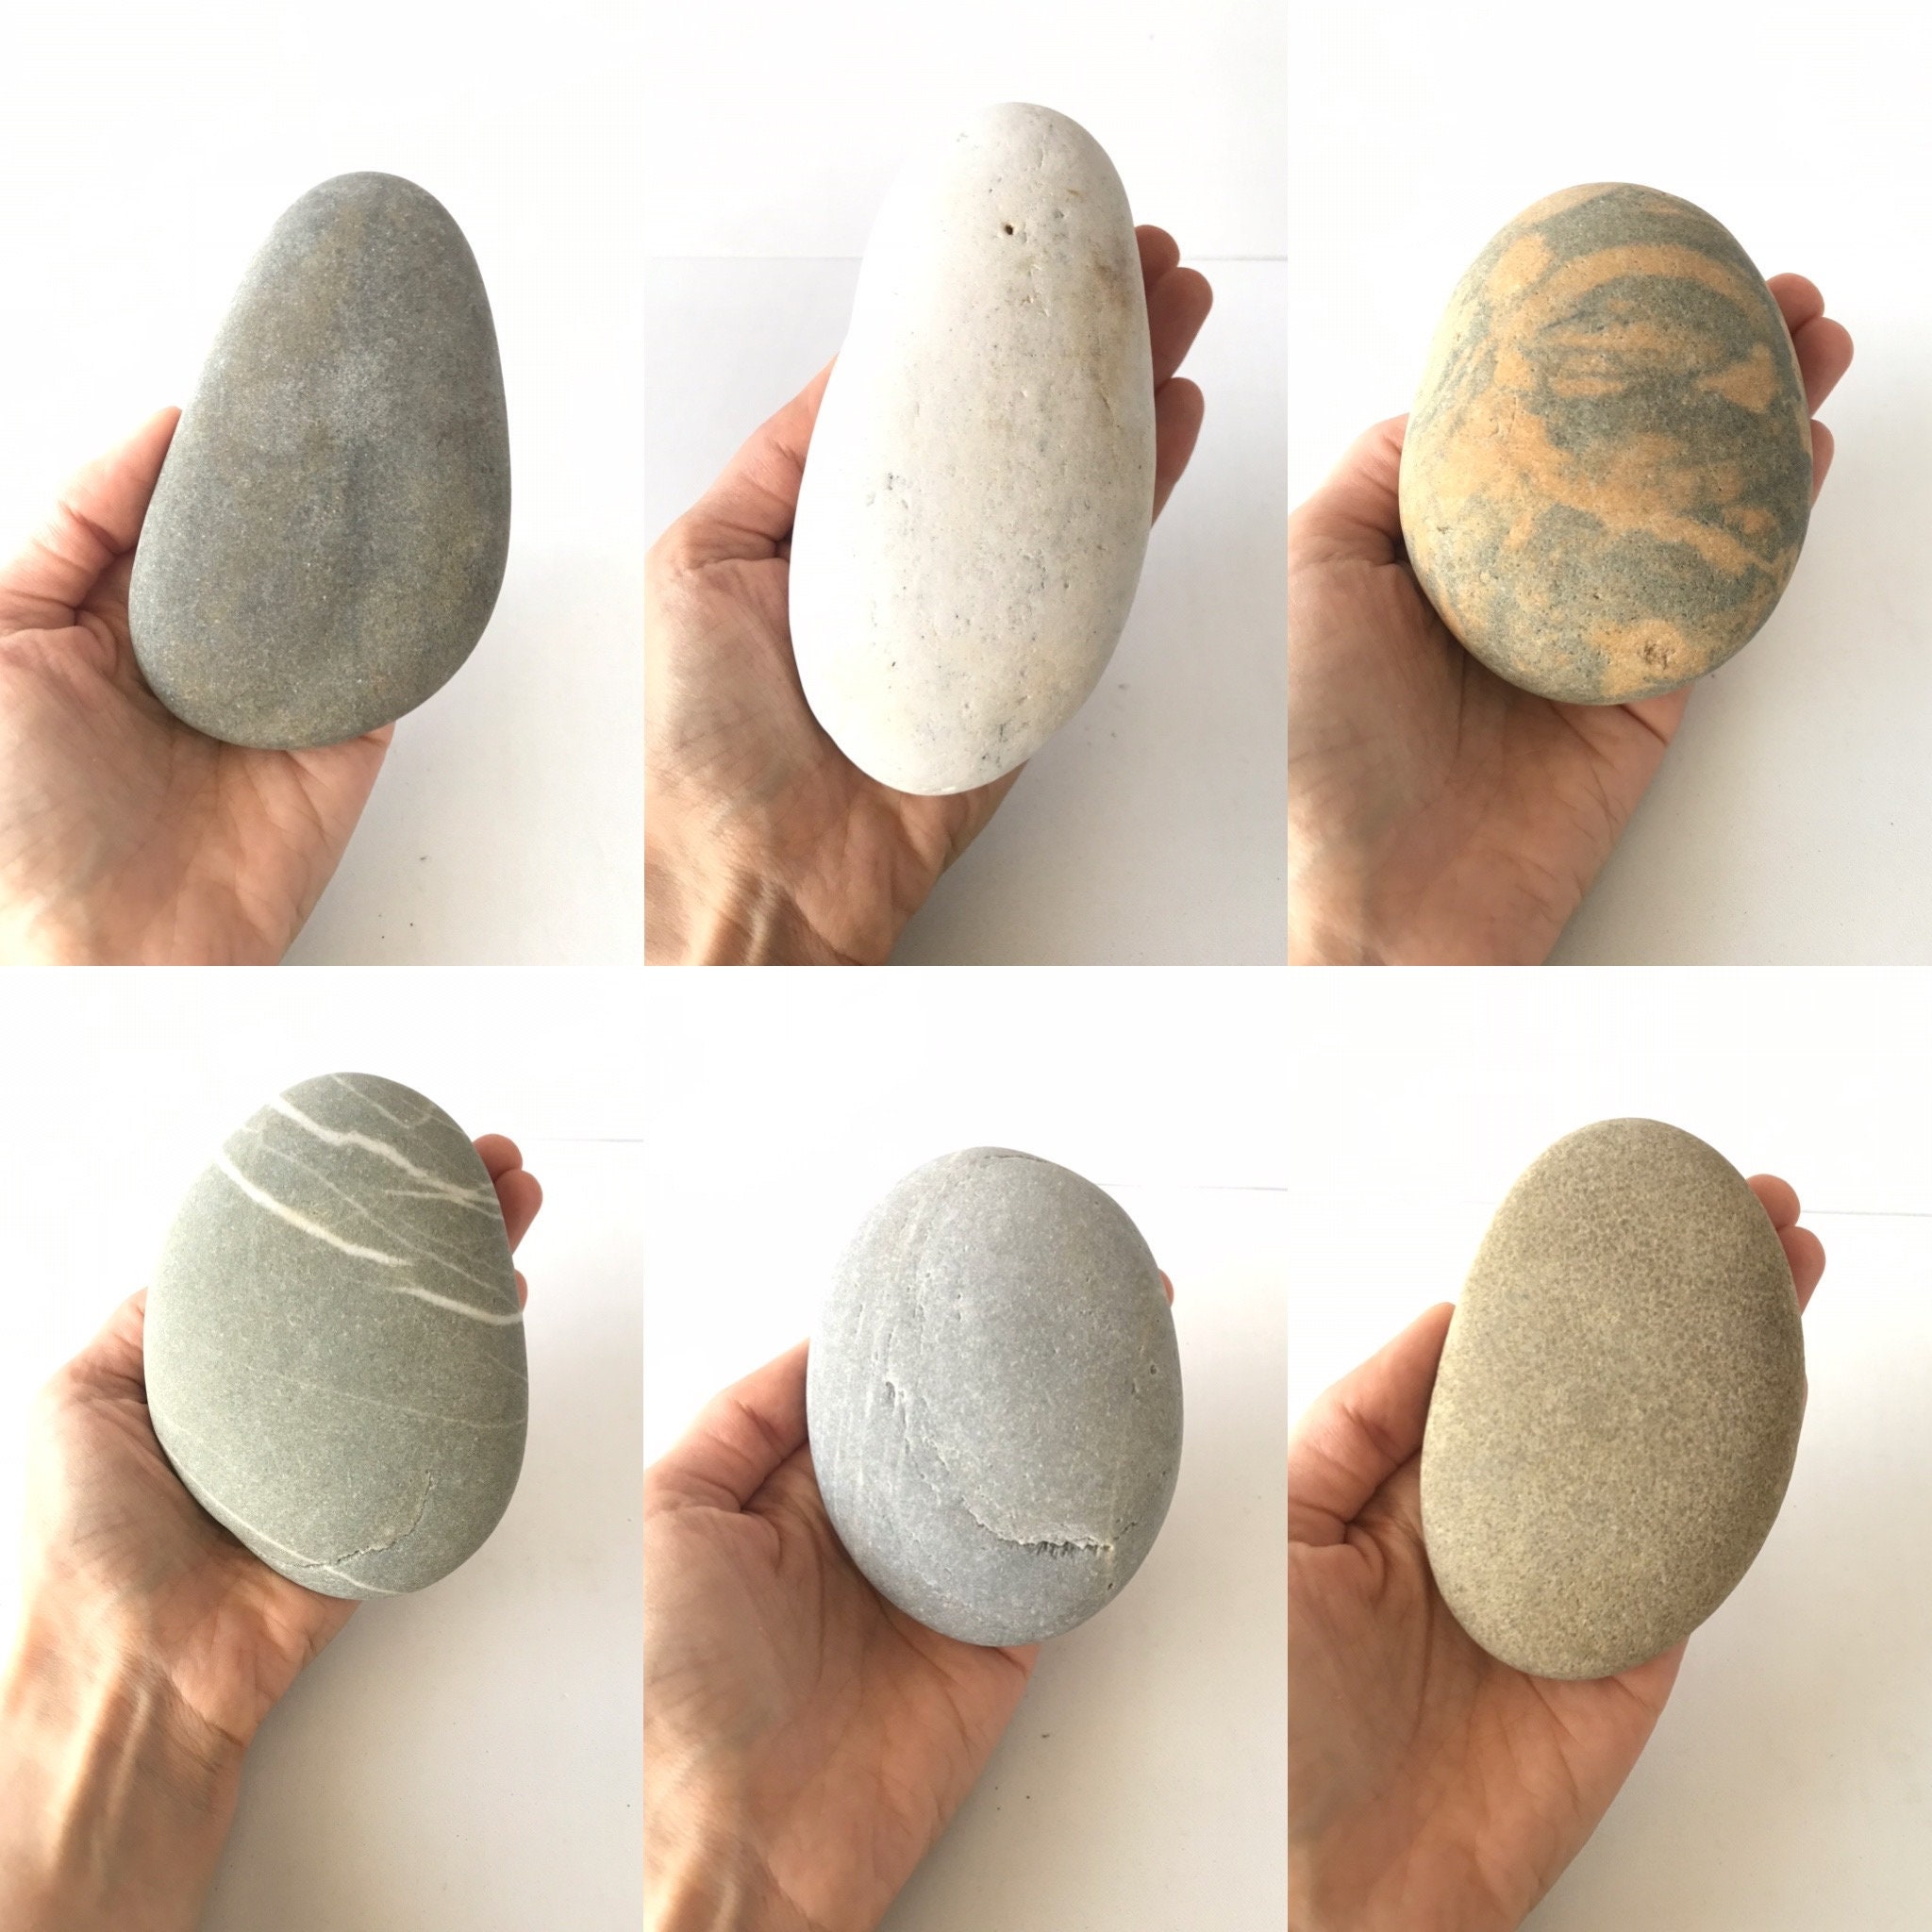  25 Rocks for Painting – Multi-Colored Large Rock